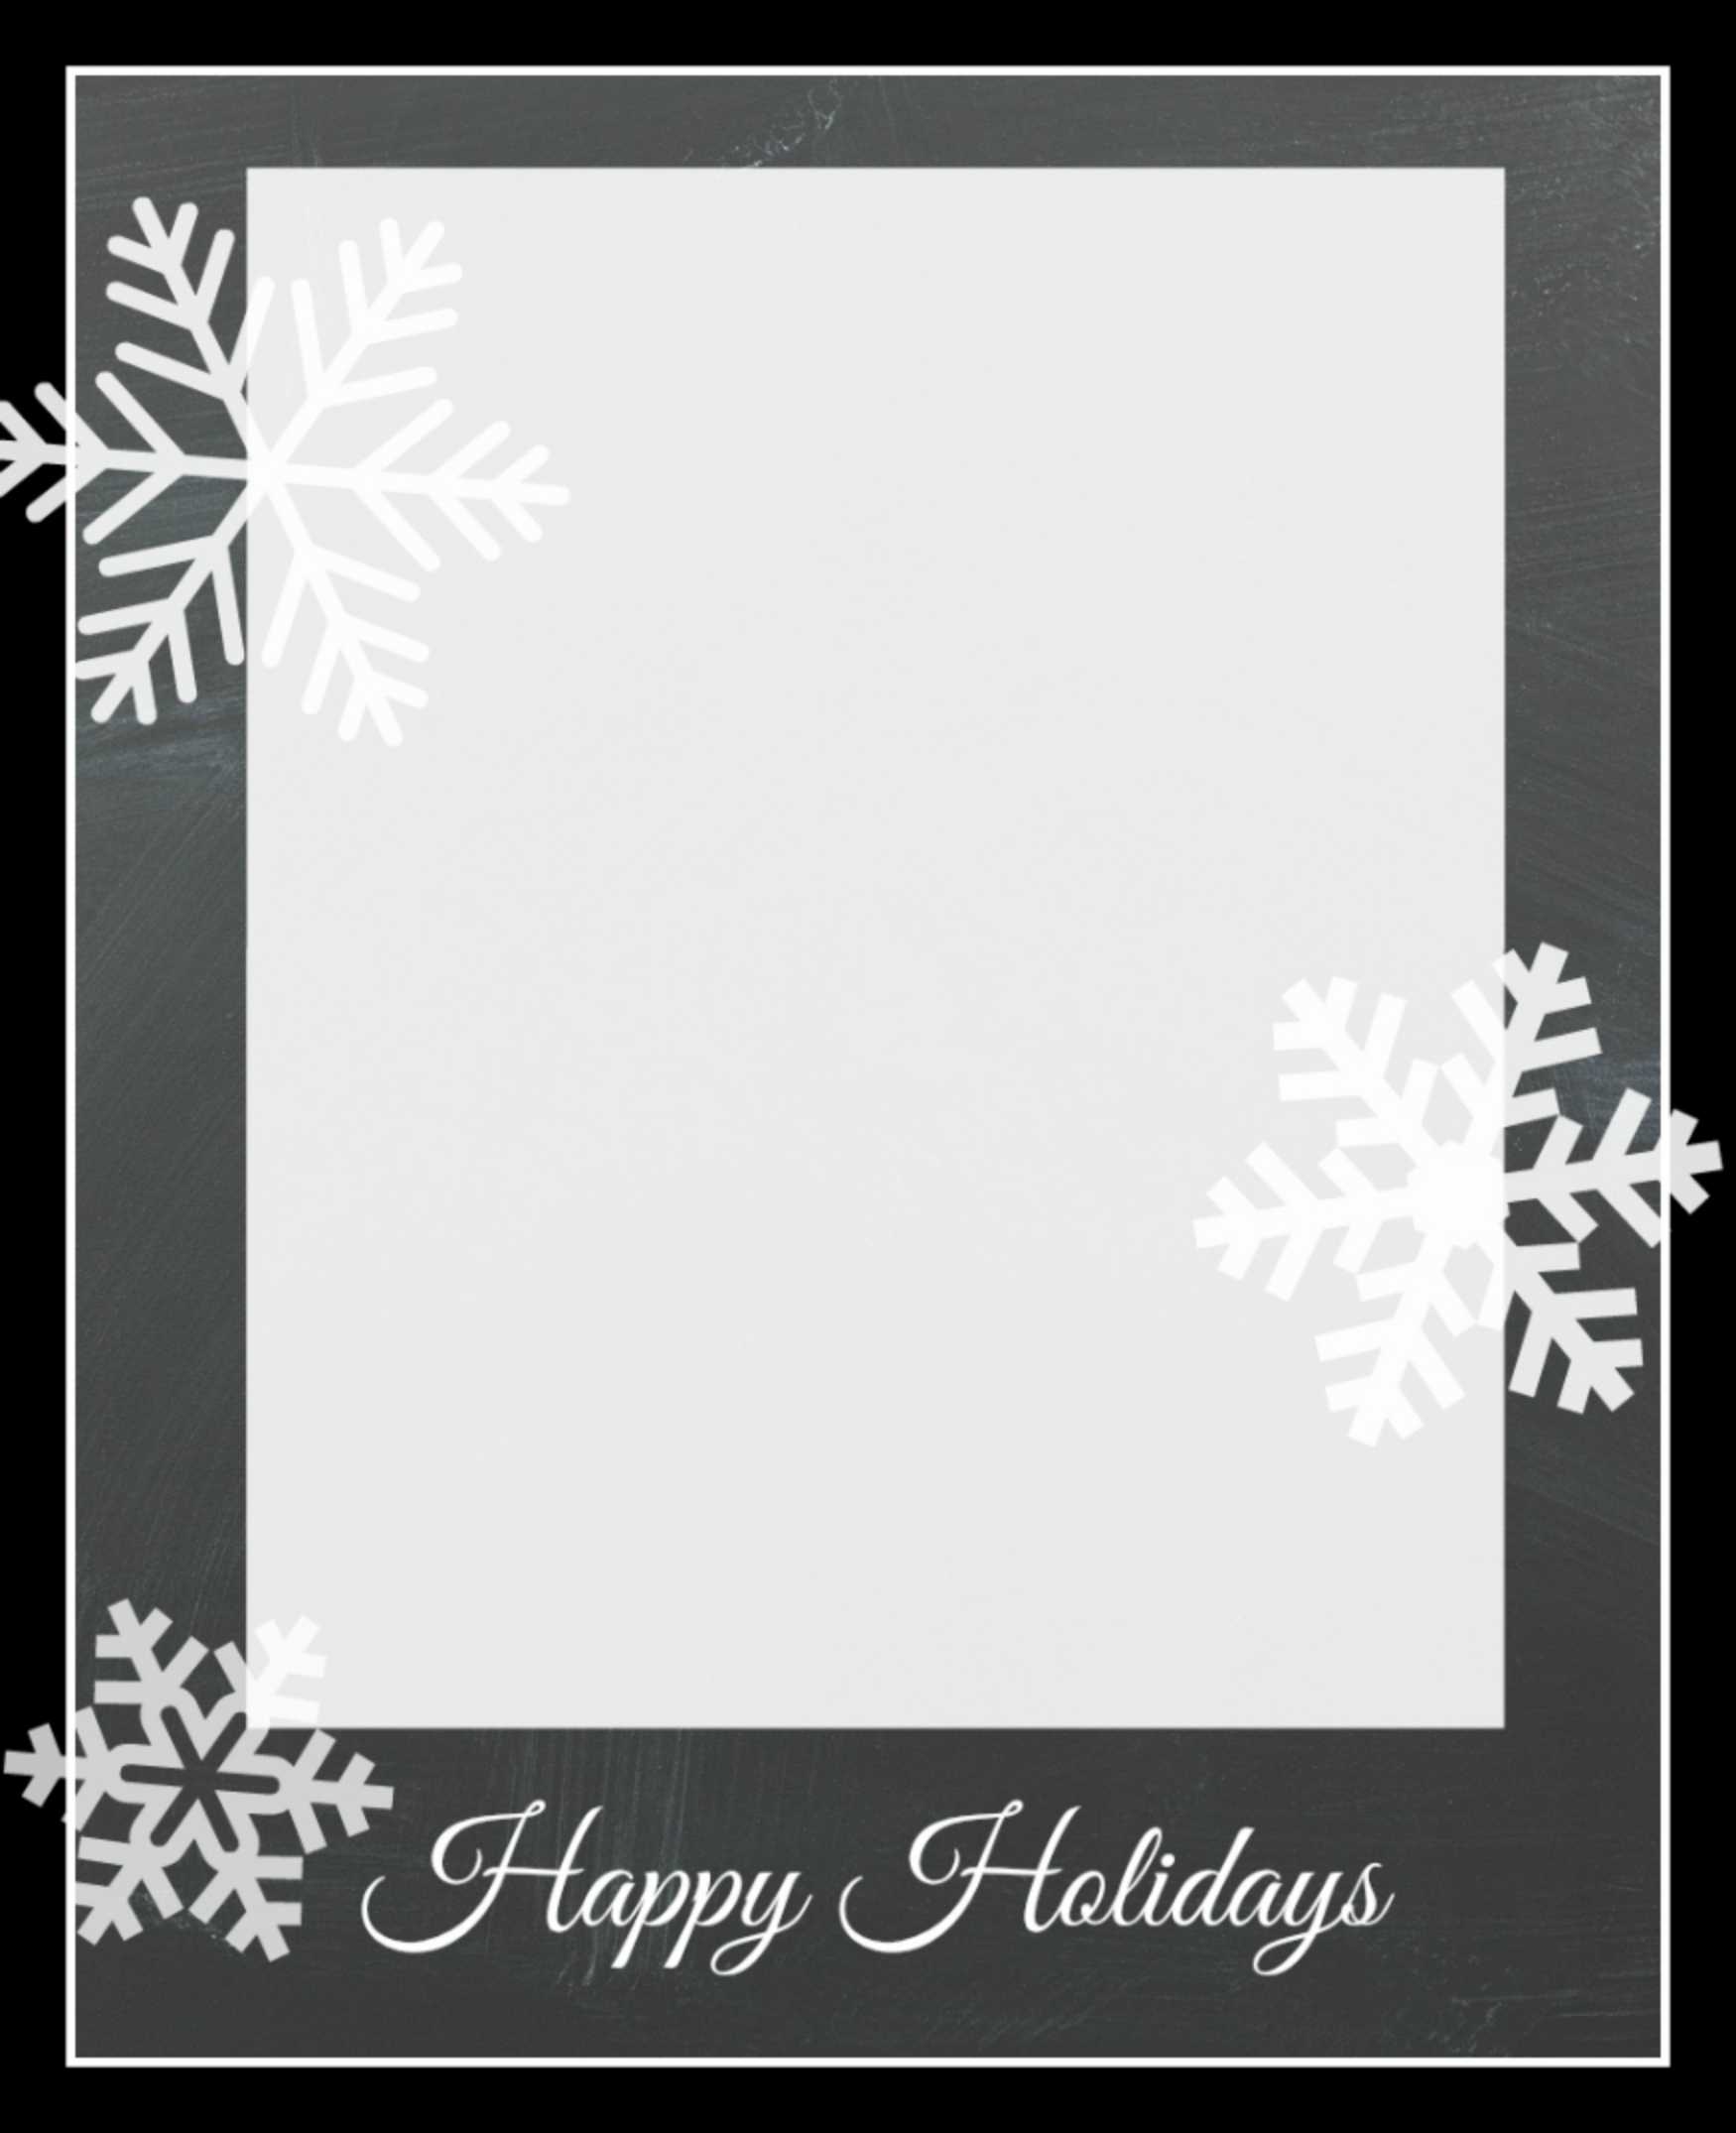 Free Christmas Card Template - Dalep.midnightpig.co Inside Free Holiday Photo Card Templates